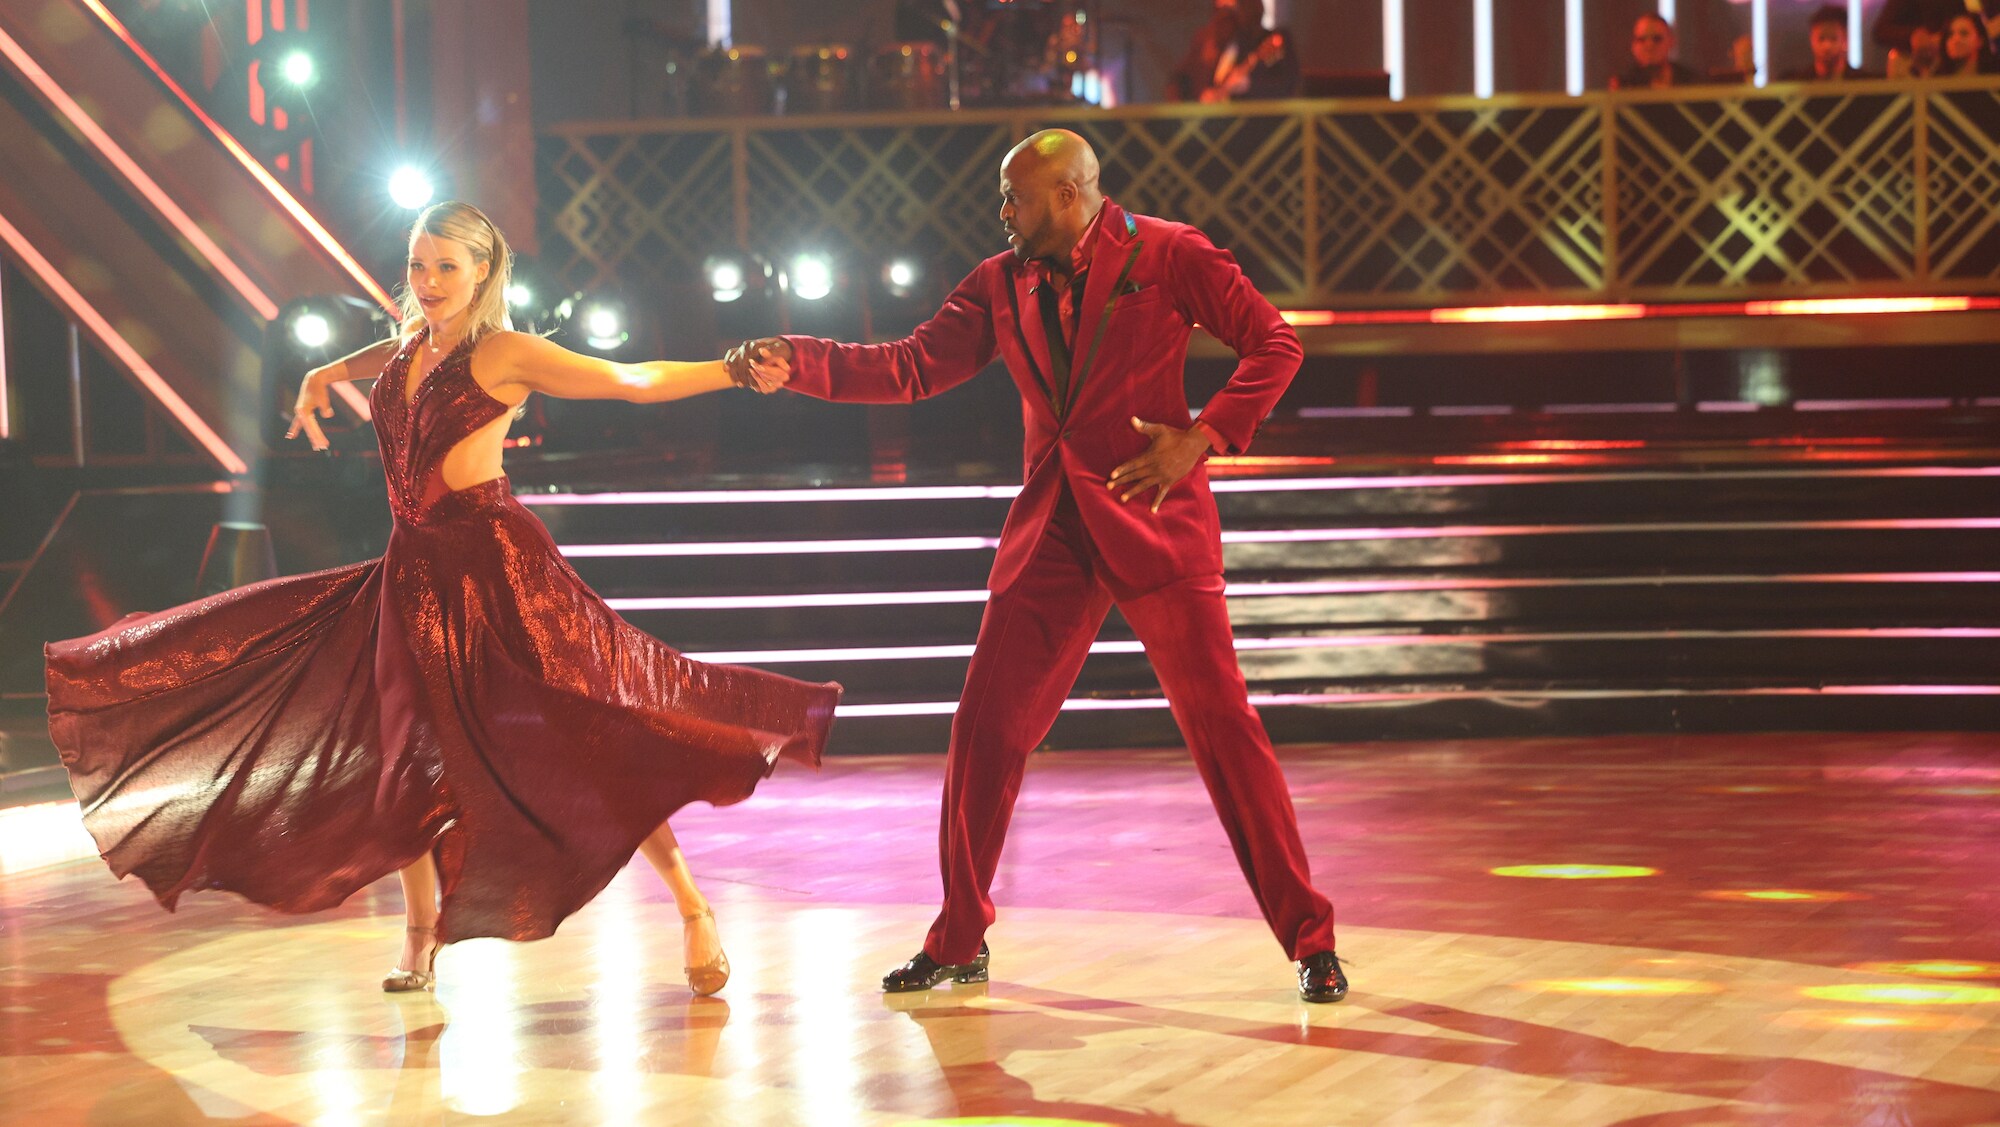 DANCING WITH THE STARS - “Semi-Finals” – The mirrorball competition heats up as the six remaining contestants head into the “Semi-Finals.” Each couple will perform two all-new routines as they fight for a spot in the finale. A new episode of “Dancing with the Stars” will stream live MONDAY, NOV. 14 (8:00pm ET / 5:00pm PT), on Disney+. (ABC/Raymond Liu) WITNEY CARSON, WAYNE BRADY